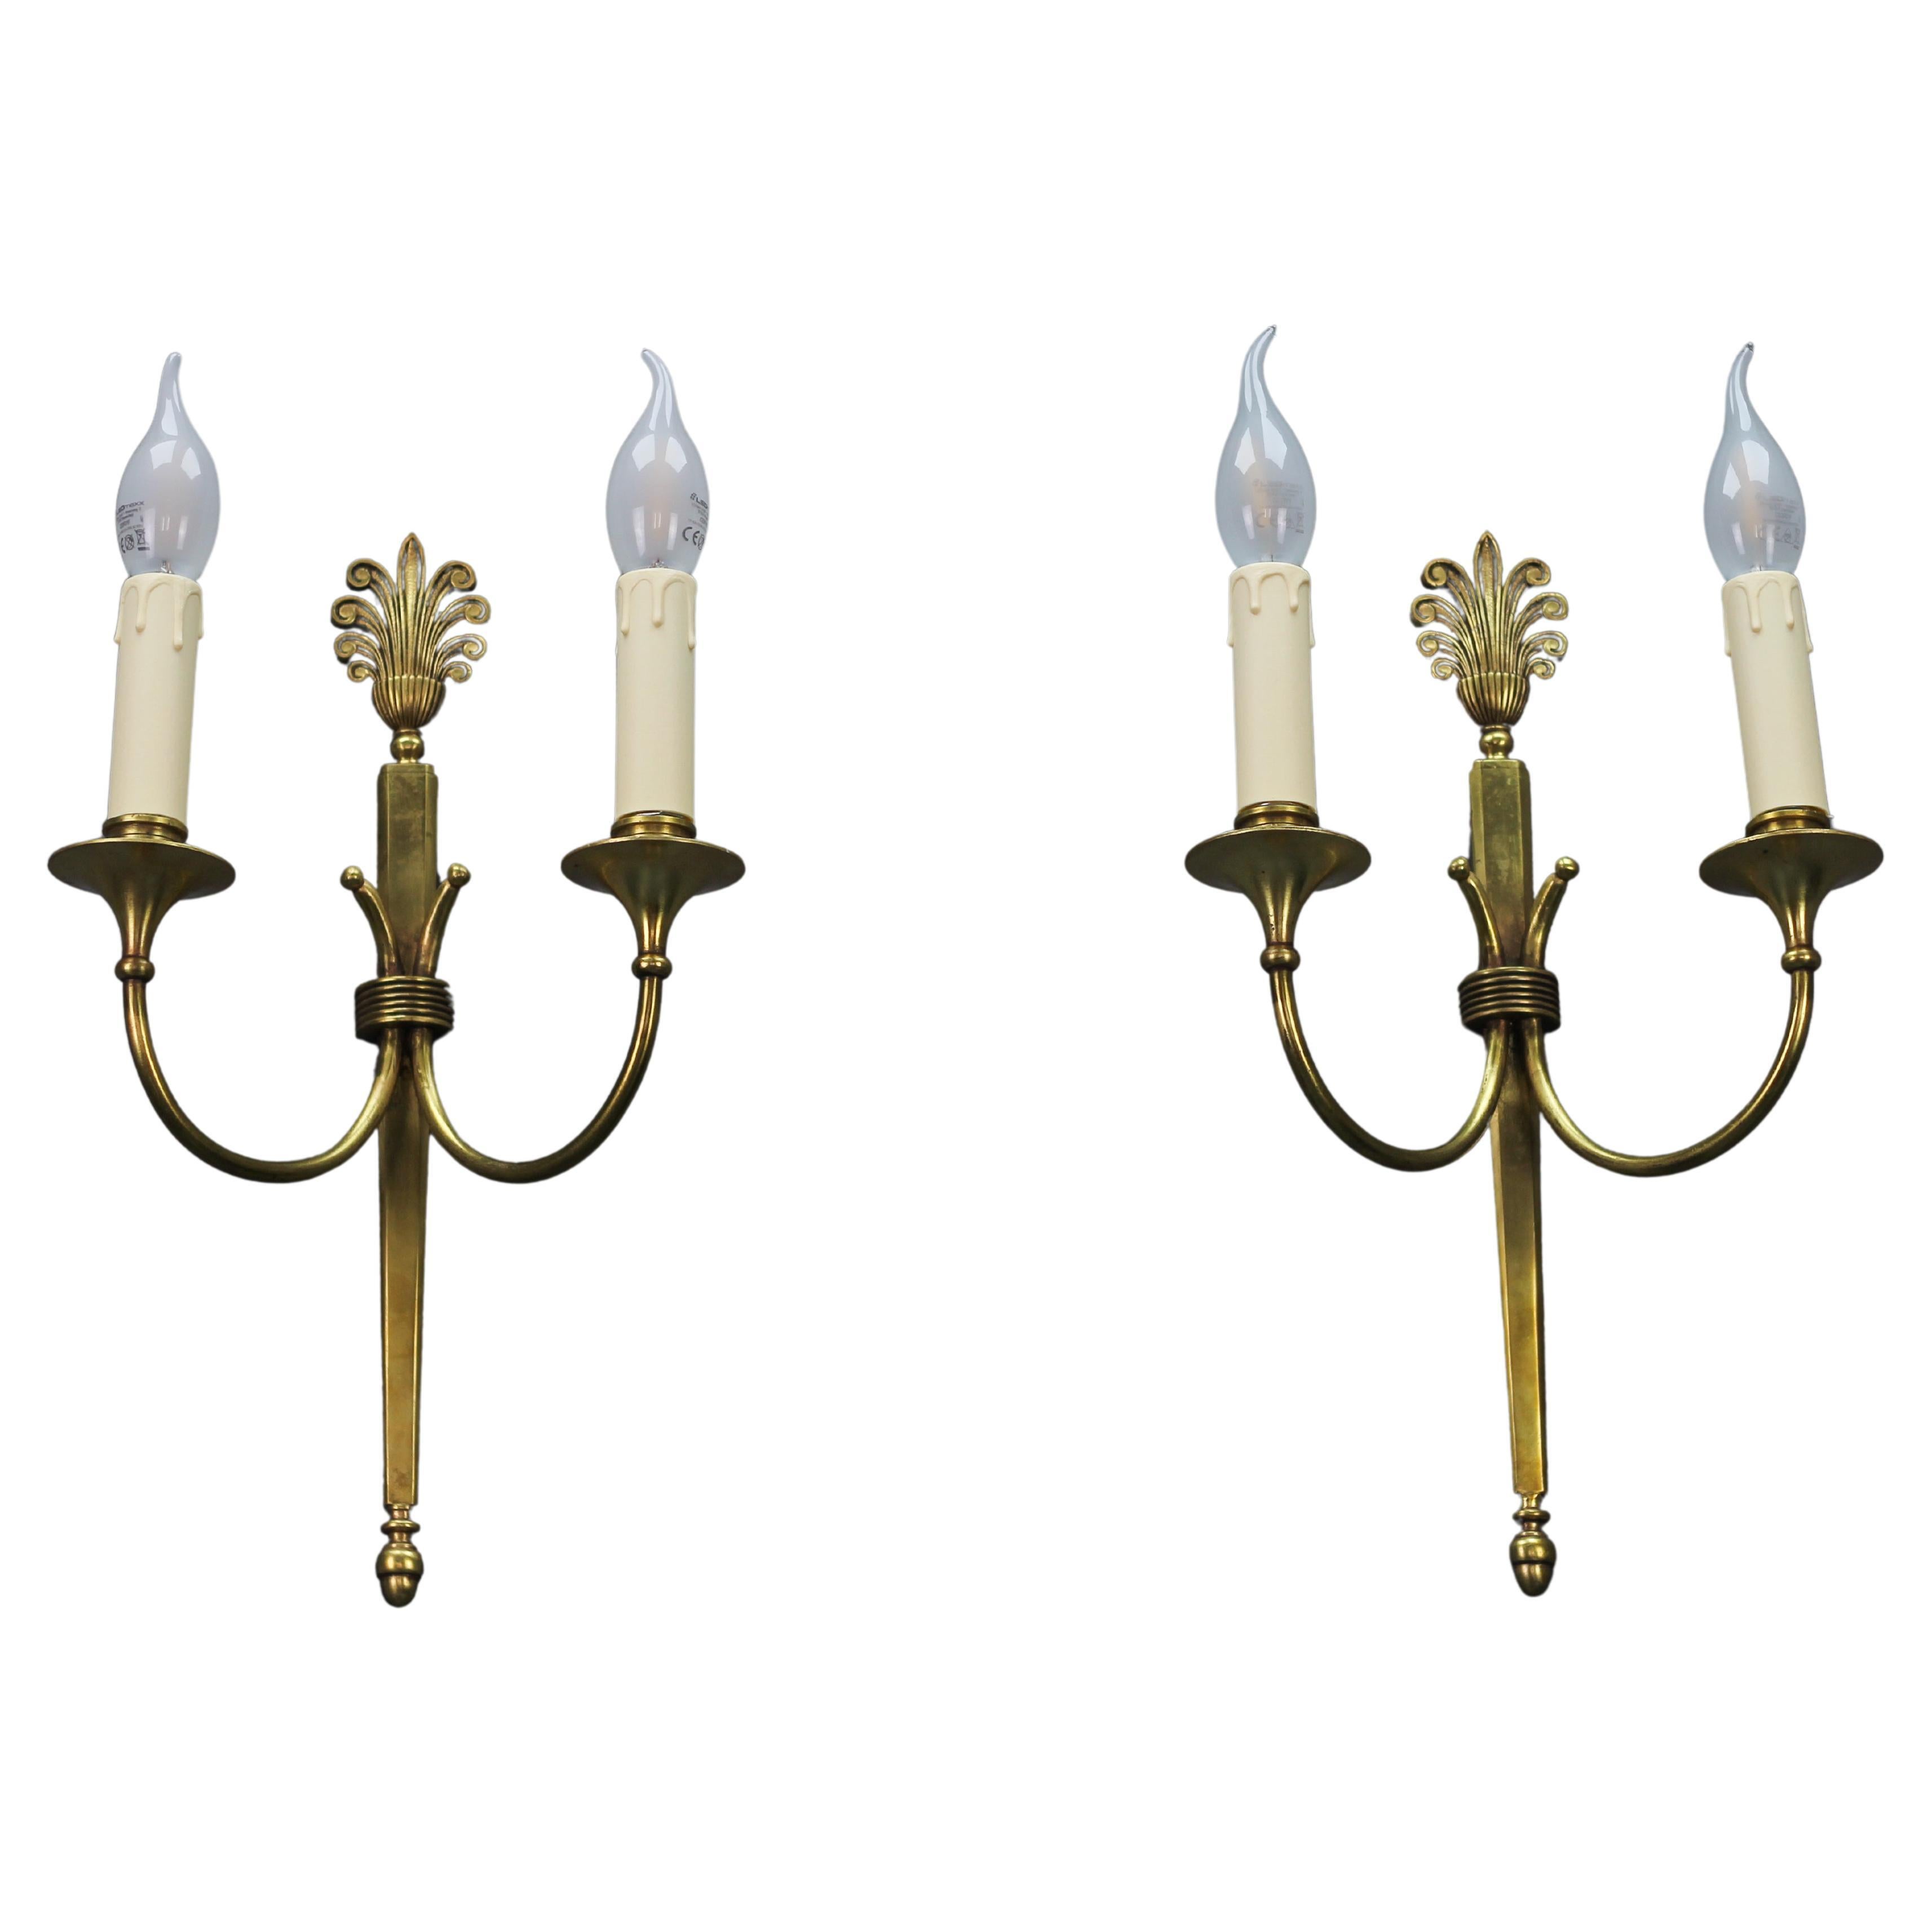 French Art Deco Brass Twin Arm Sconces, a Pair, ca. 1930